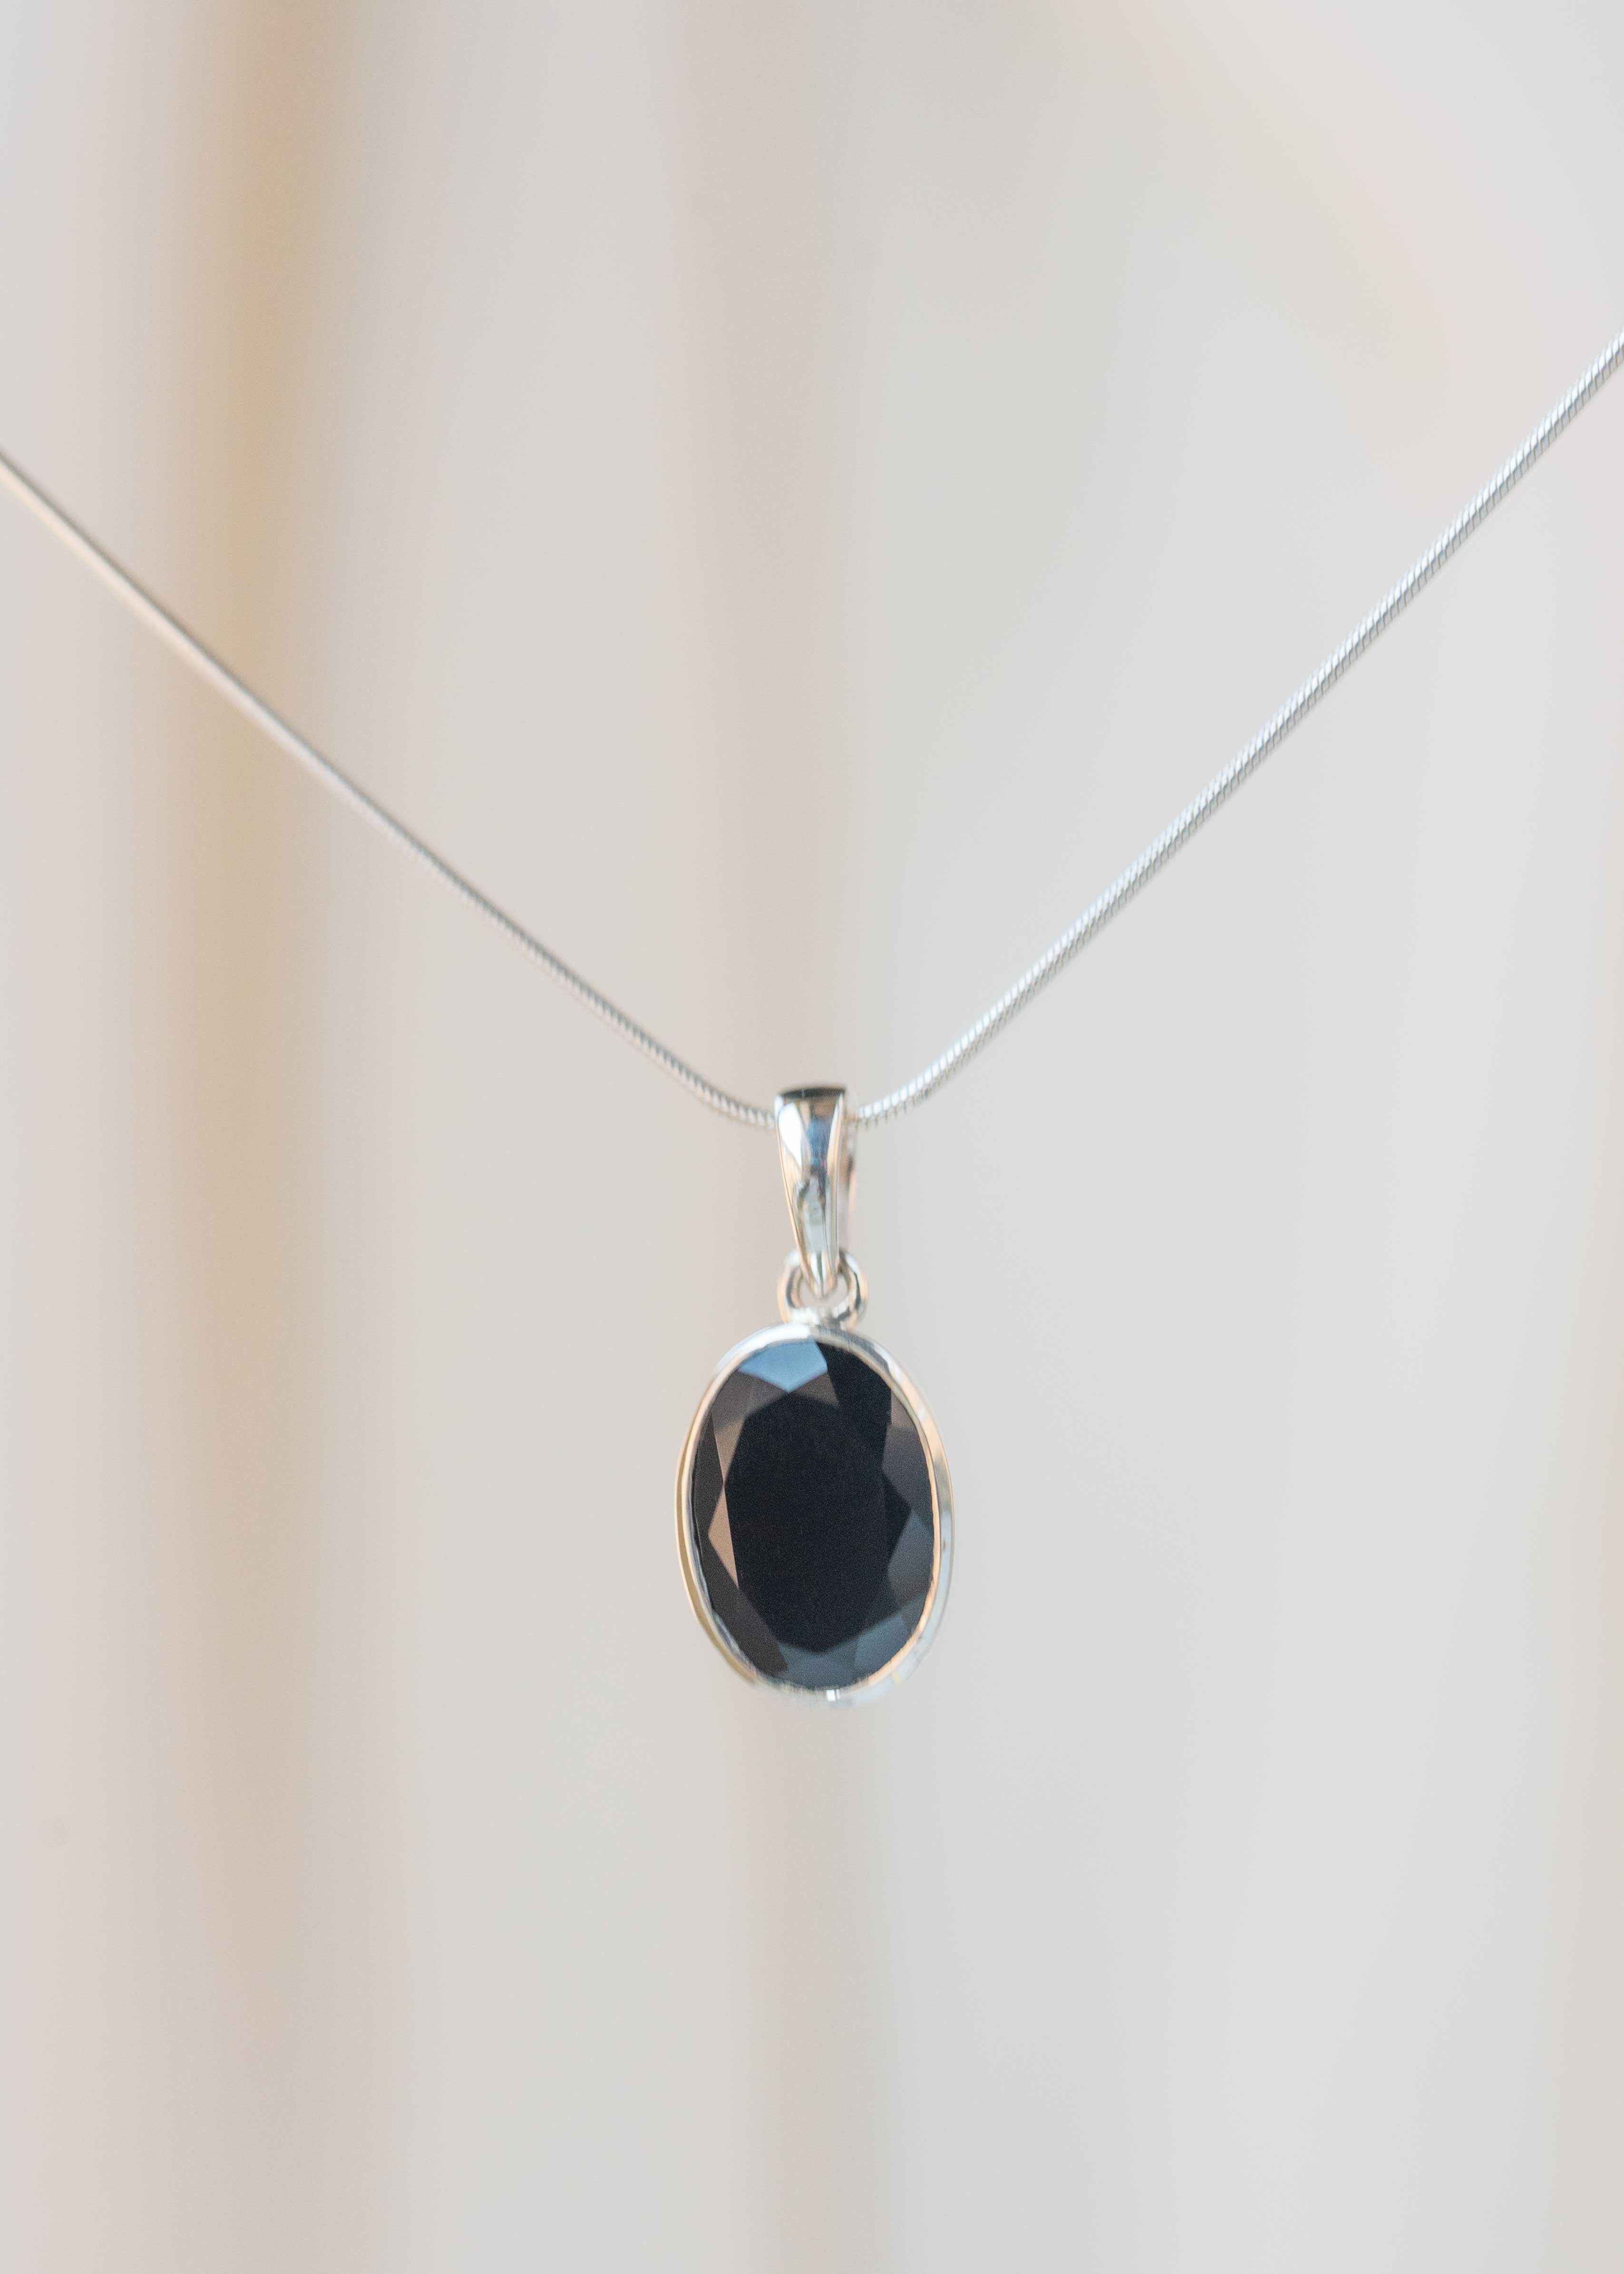 Black Onyx Pendant Necklace oval womens gifts sterling silver